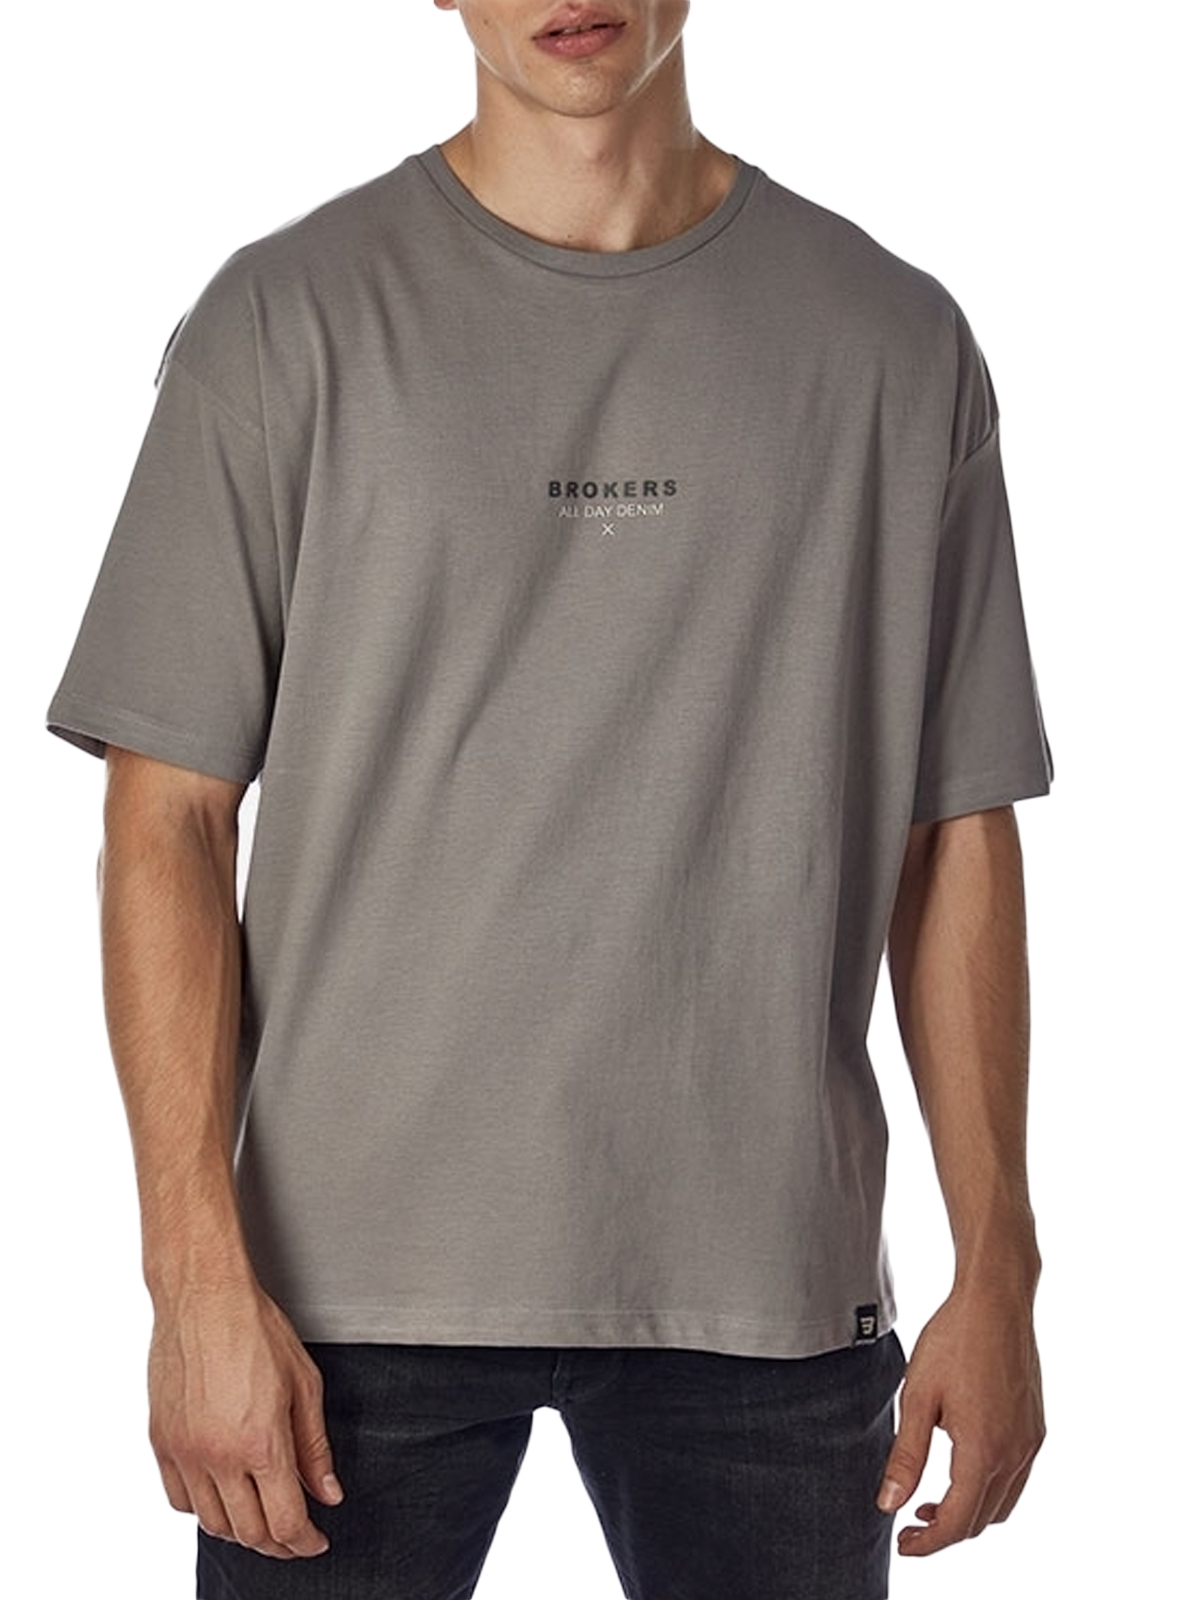   Brokers | Oversize All Day Denim Tee | Mens T-Shirts